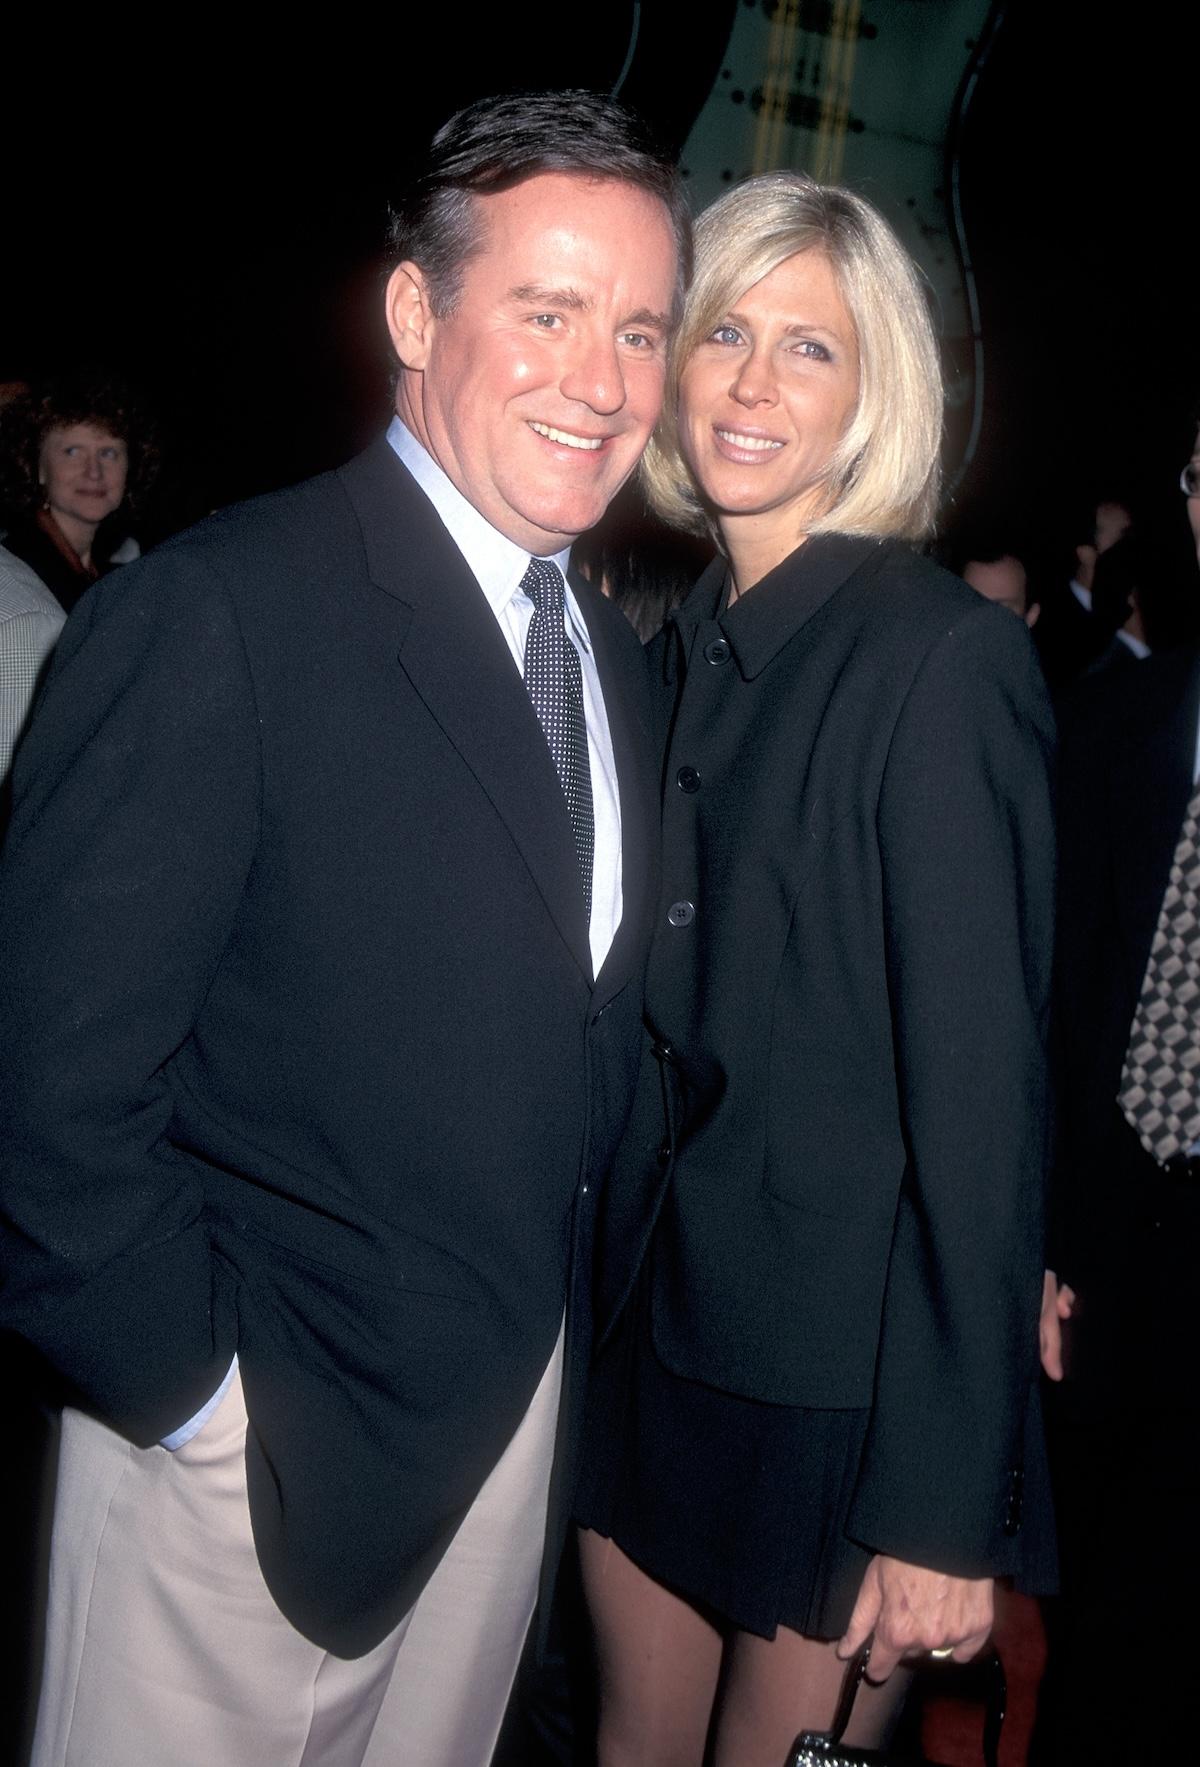 Phil Hartman and wife Brynn attend the "Sgt. Bilko" Universal City Premiere on March 27, 1996